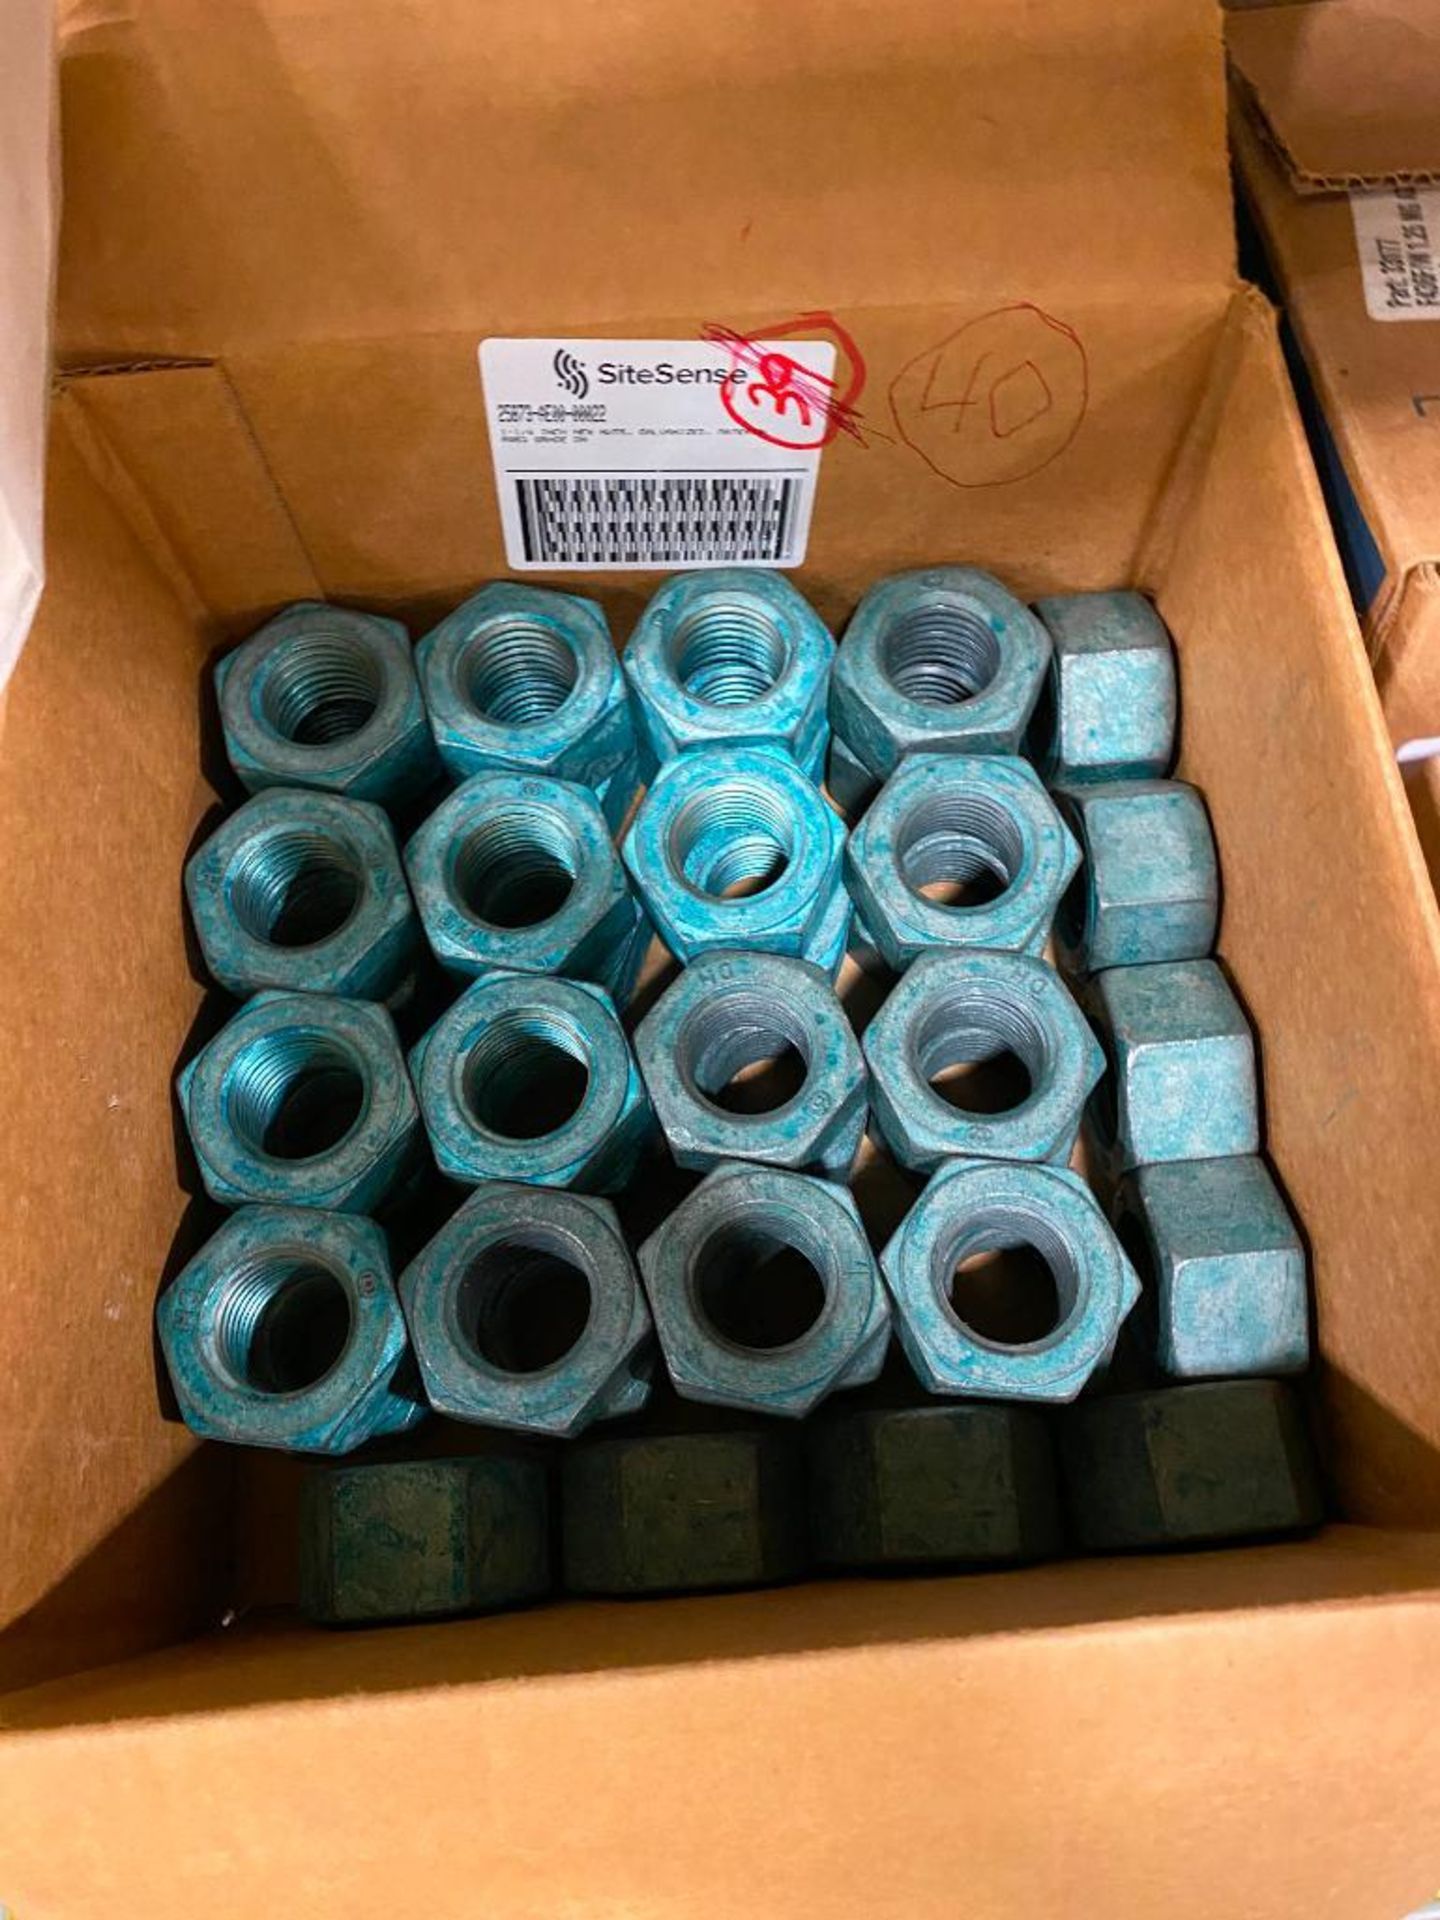 (8) Skids of Misc. Parker Fittings, Coated Nuts, PVC Conduit 4" Fittings, 732 Multi-Purpose Sealant, - Image 6 of 14